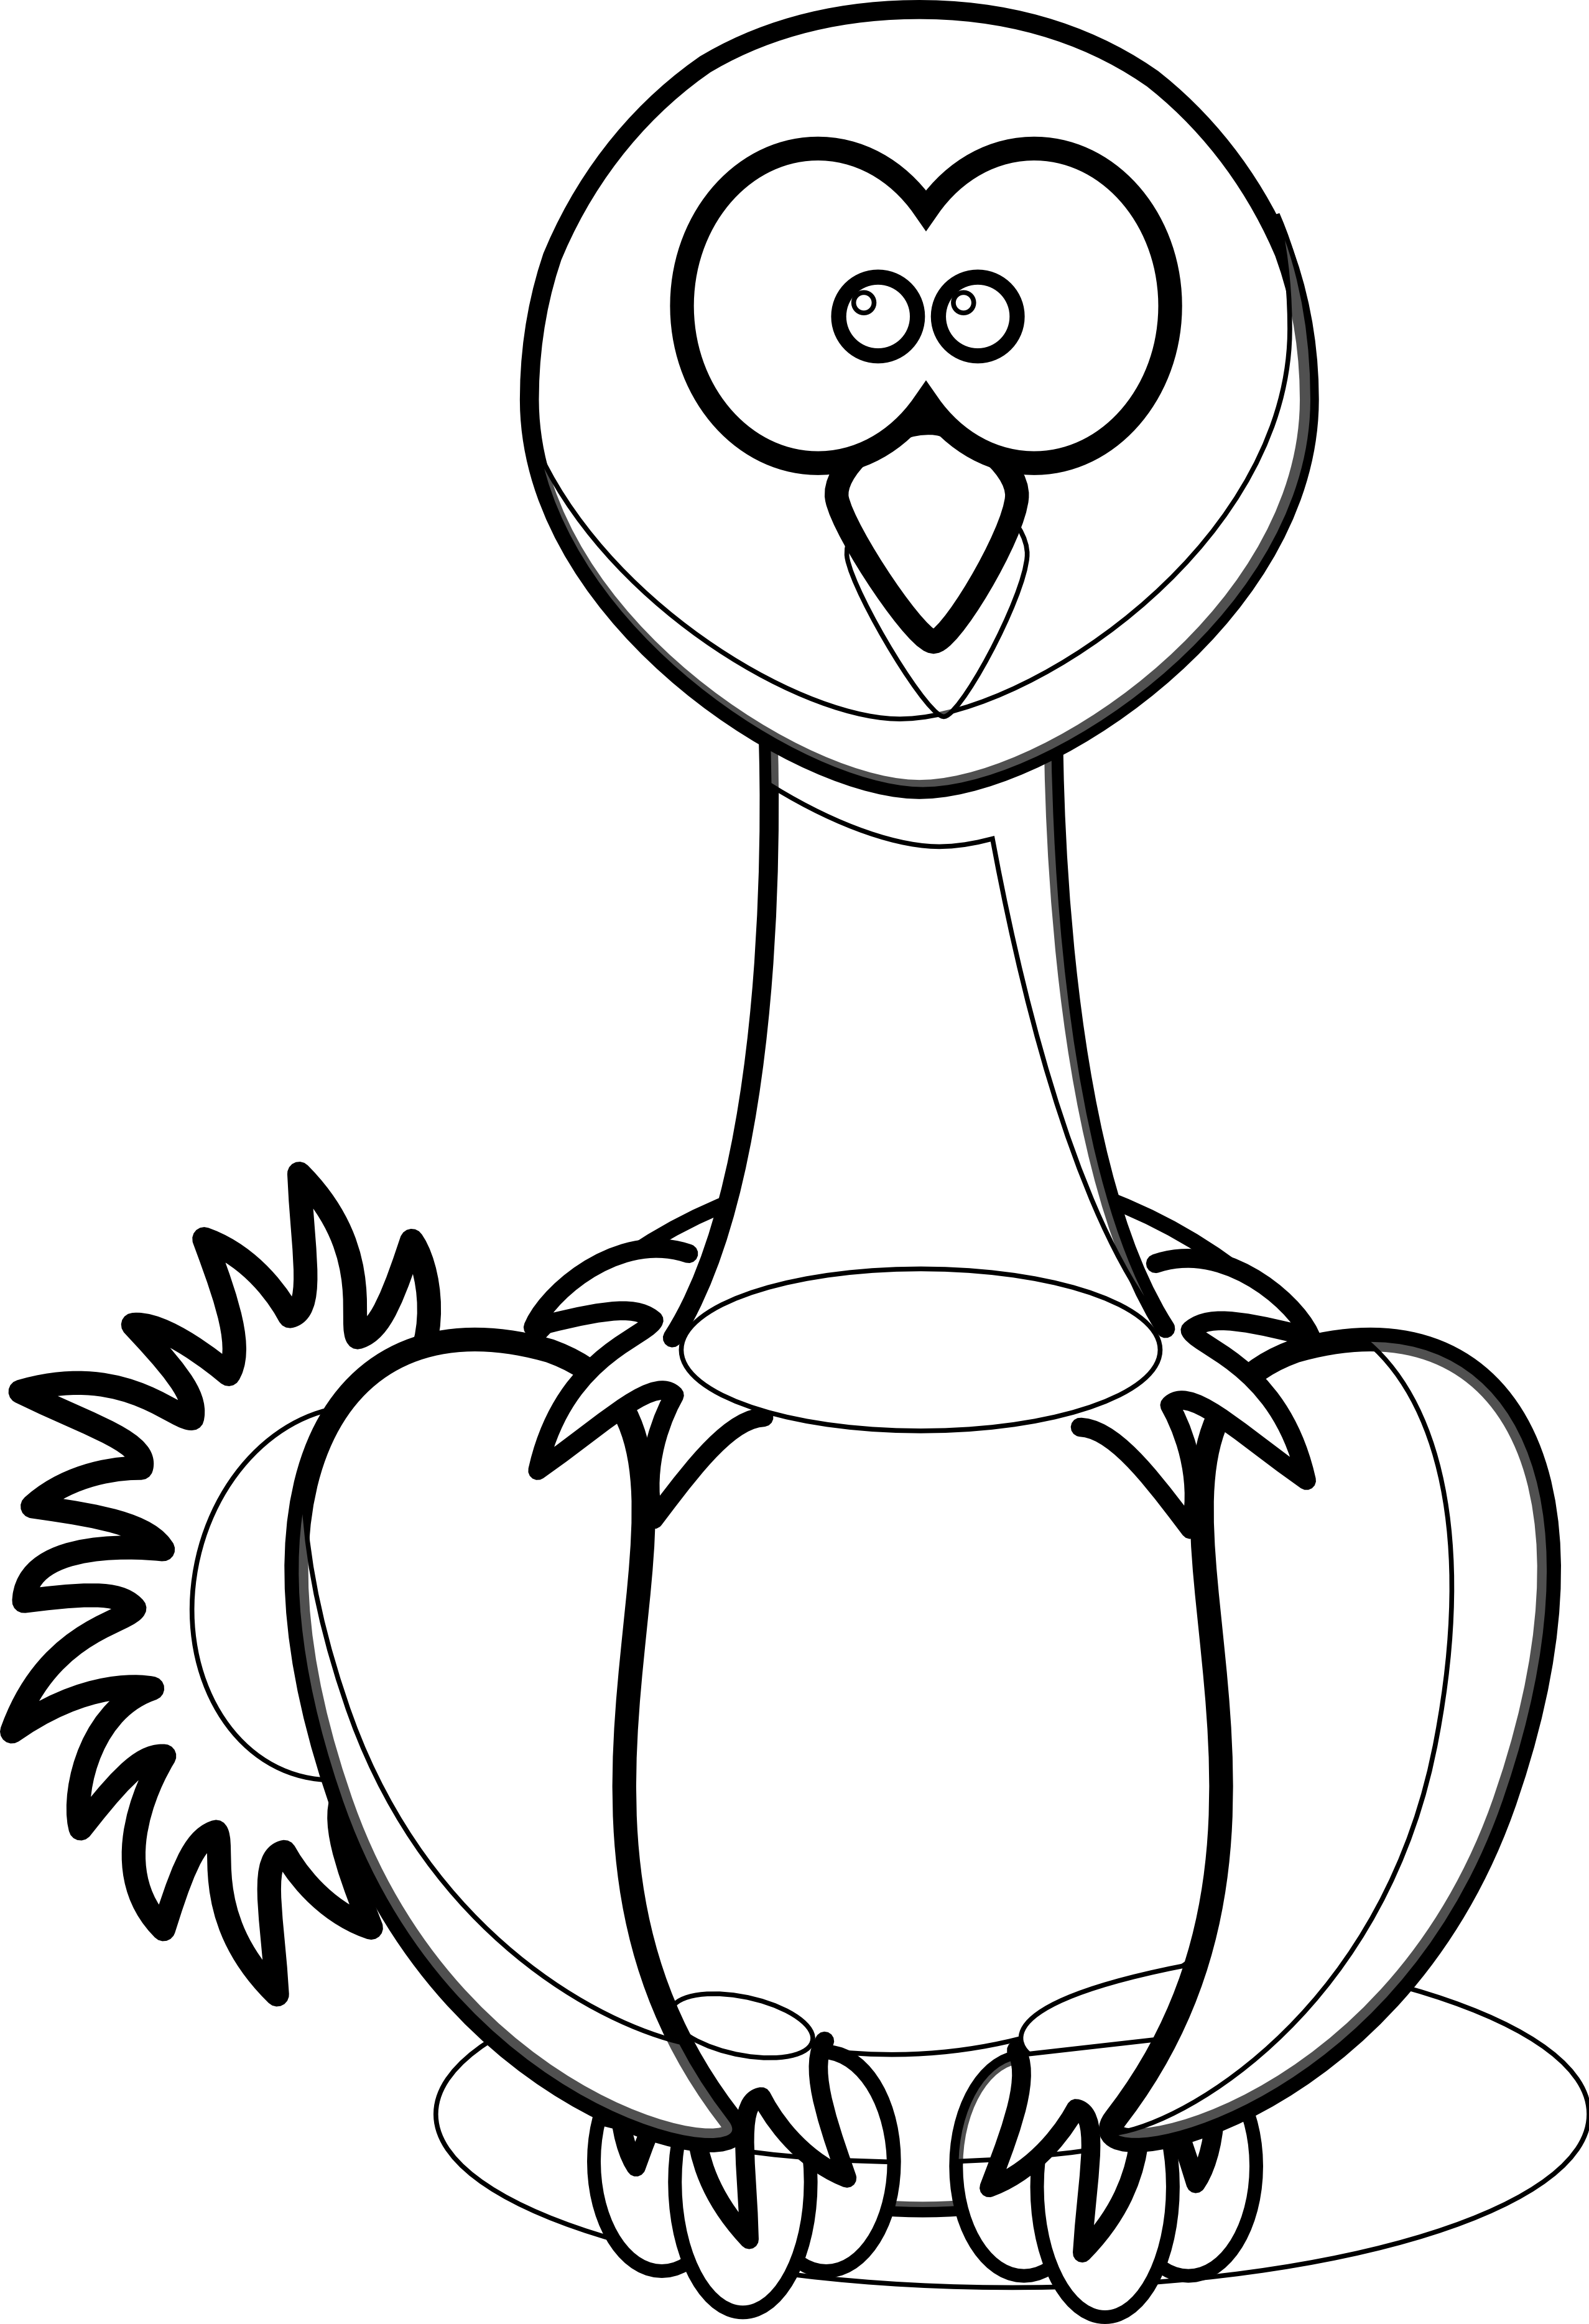 Ostrich Clipart Black And White Clipart Panda - Peacock Cartoon Black And White (2555x3737)